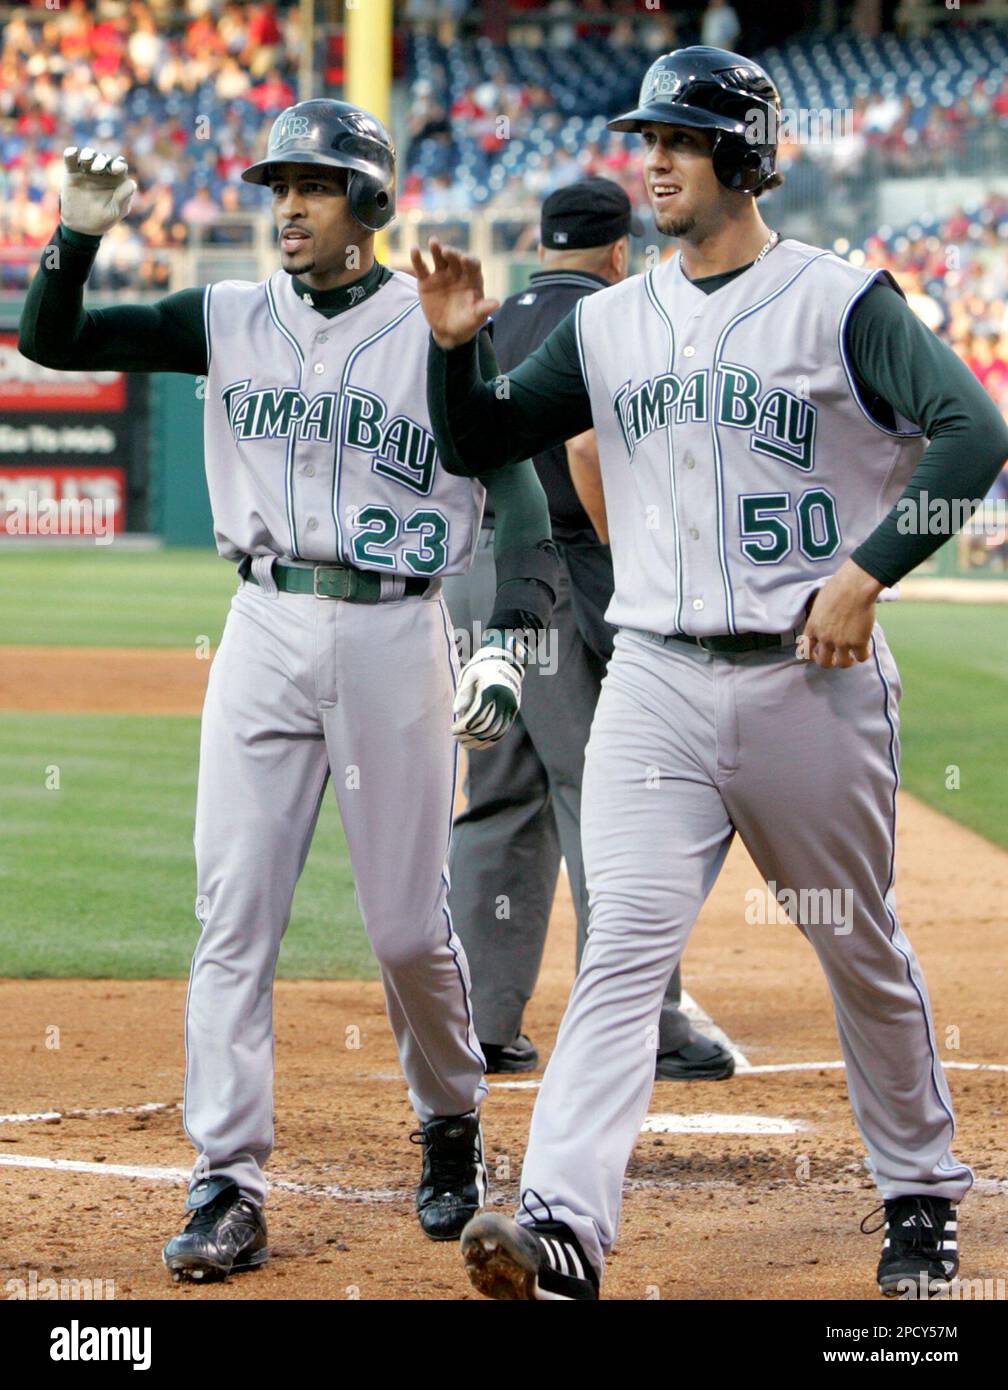 Tampa Bay Devil Rays' Julio Lugo, left, and James Shields walk to the dugout after Lugo hit a home run off Philadelphia Phillies' Cole Hamels with Shields on base in the third inning of a baseball game Friday, June 16, 2006, in Philadelphia. (AP Photo/Rusty Kennedy) Stock Photo